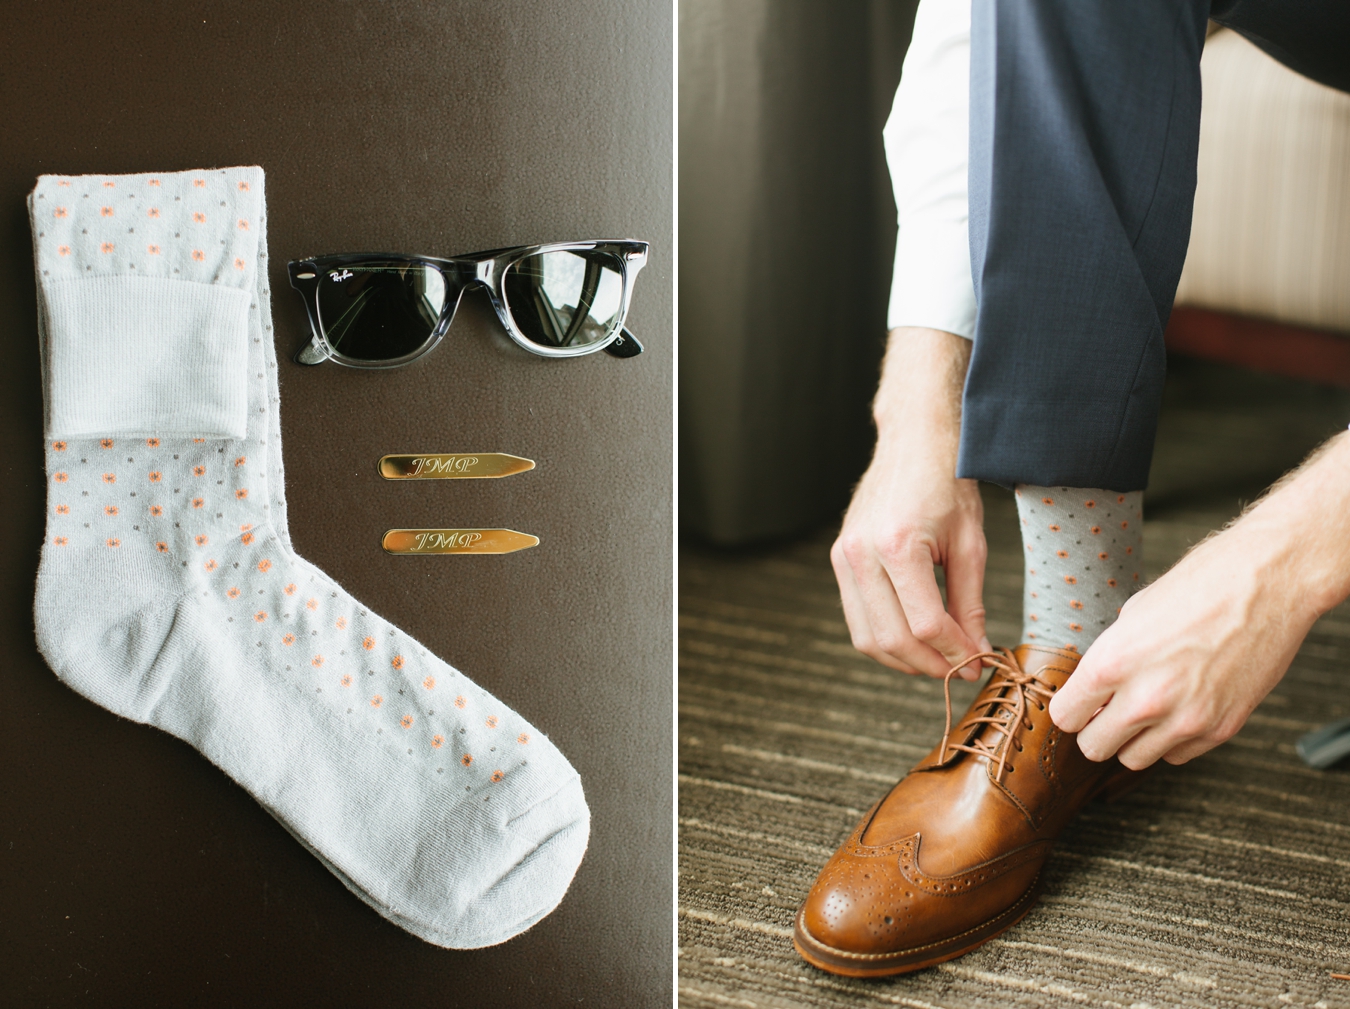 Groom's Details with Preppy Socks and Sunglasses